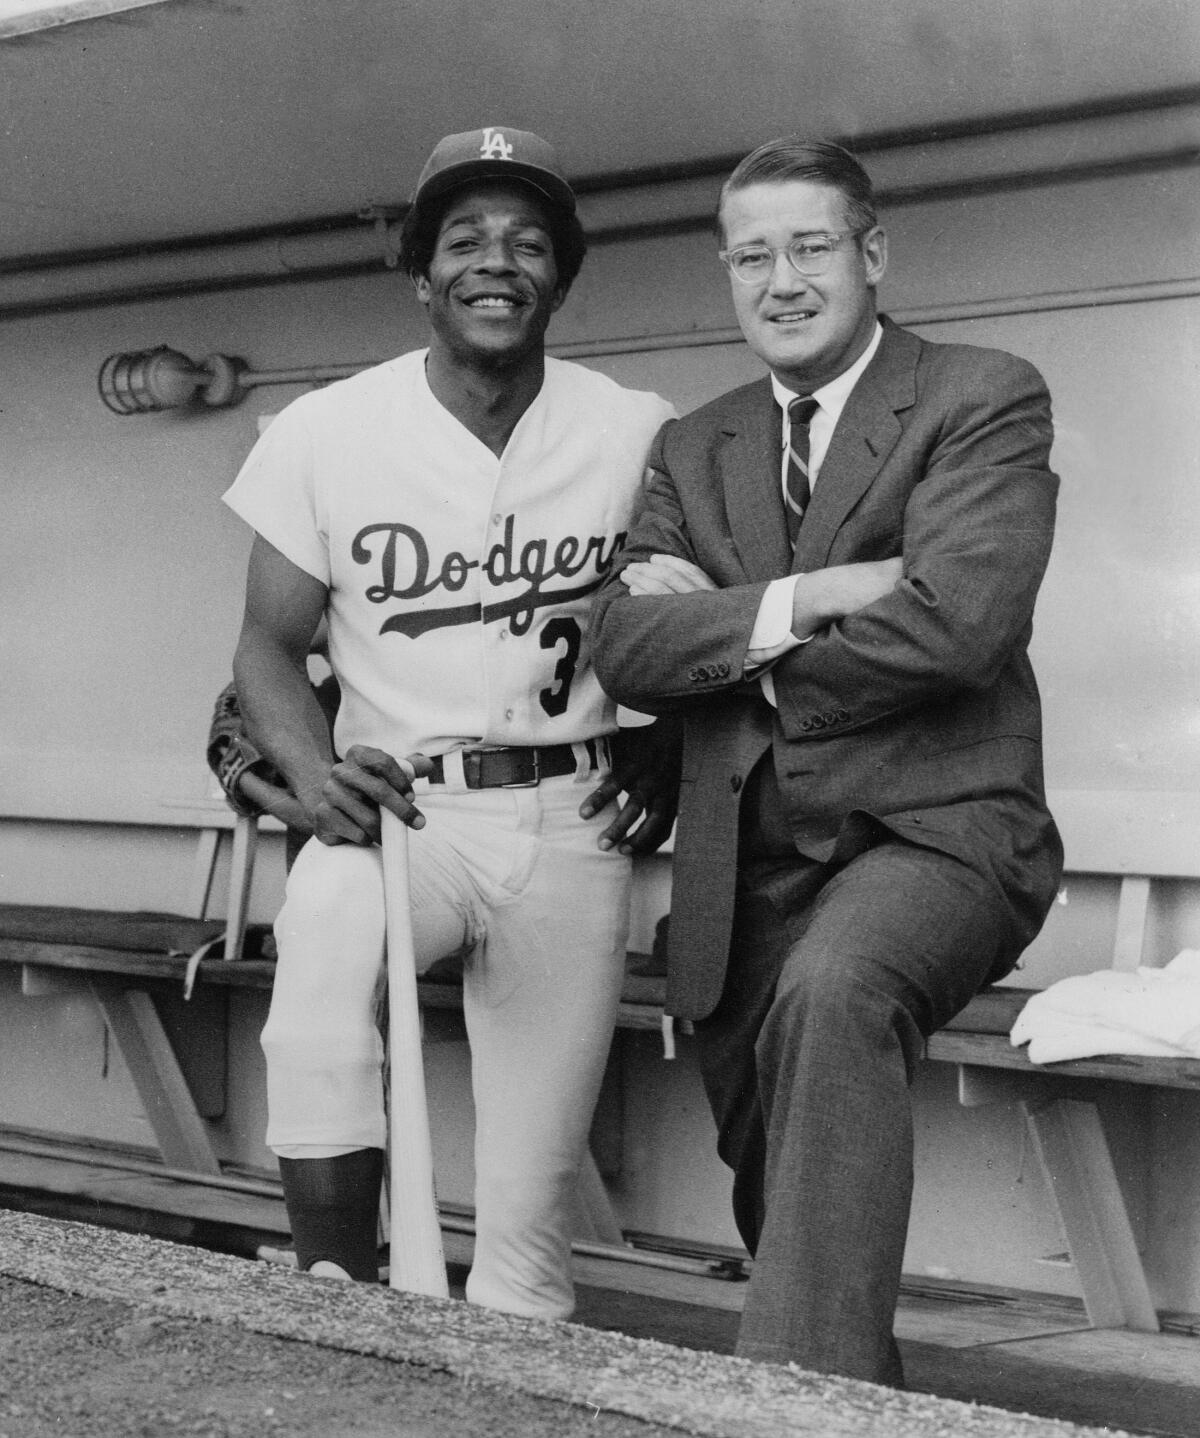 Dodger President Peter O'Malley and outfielder Willie Davis in 1970